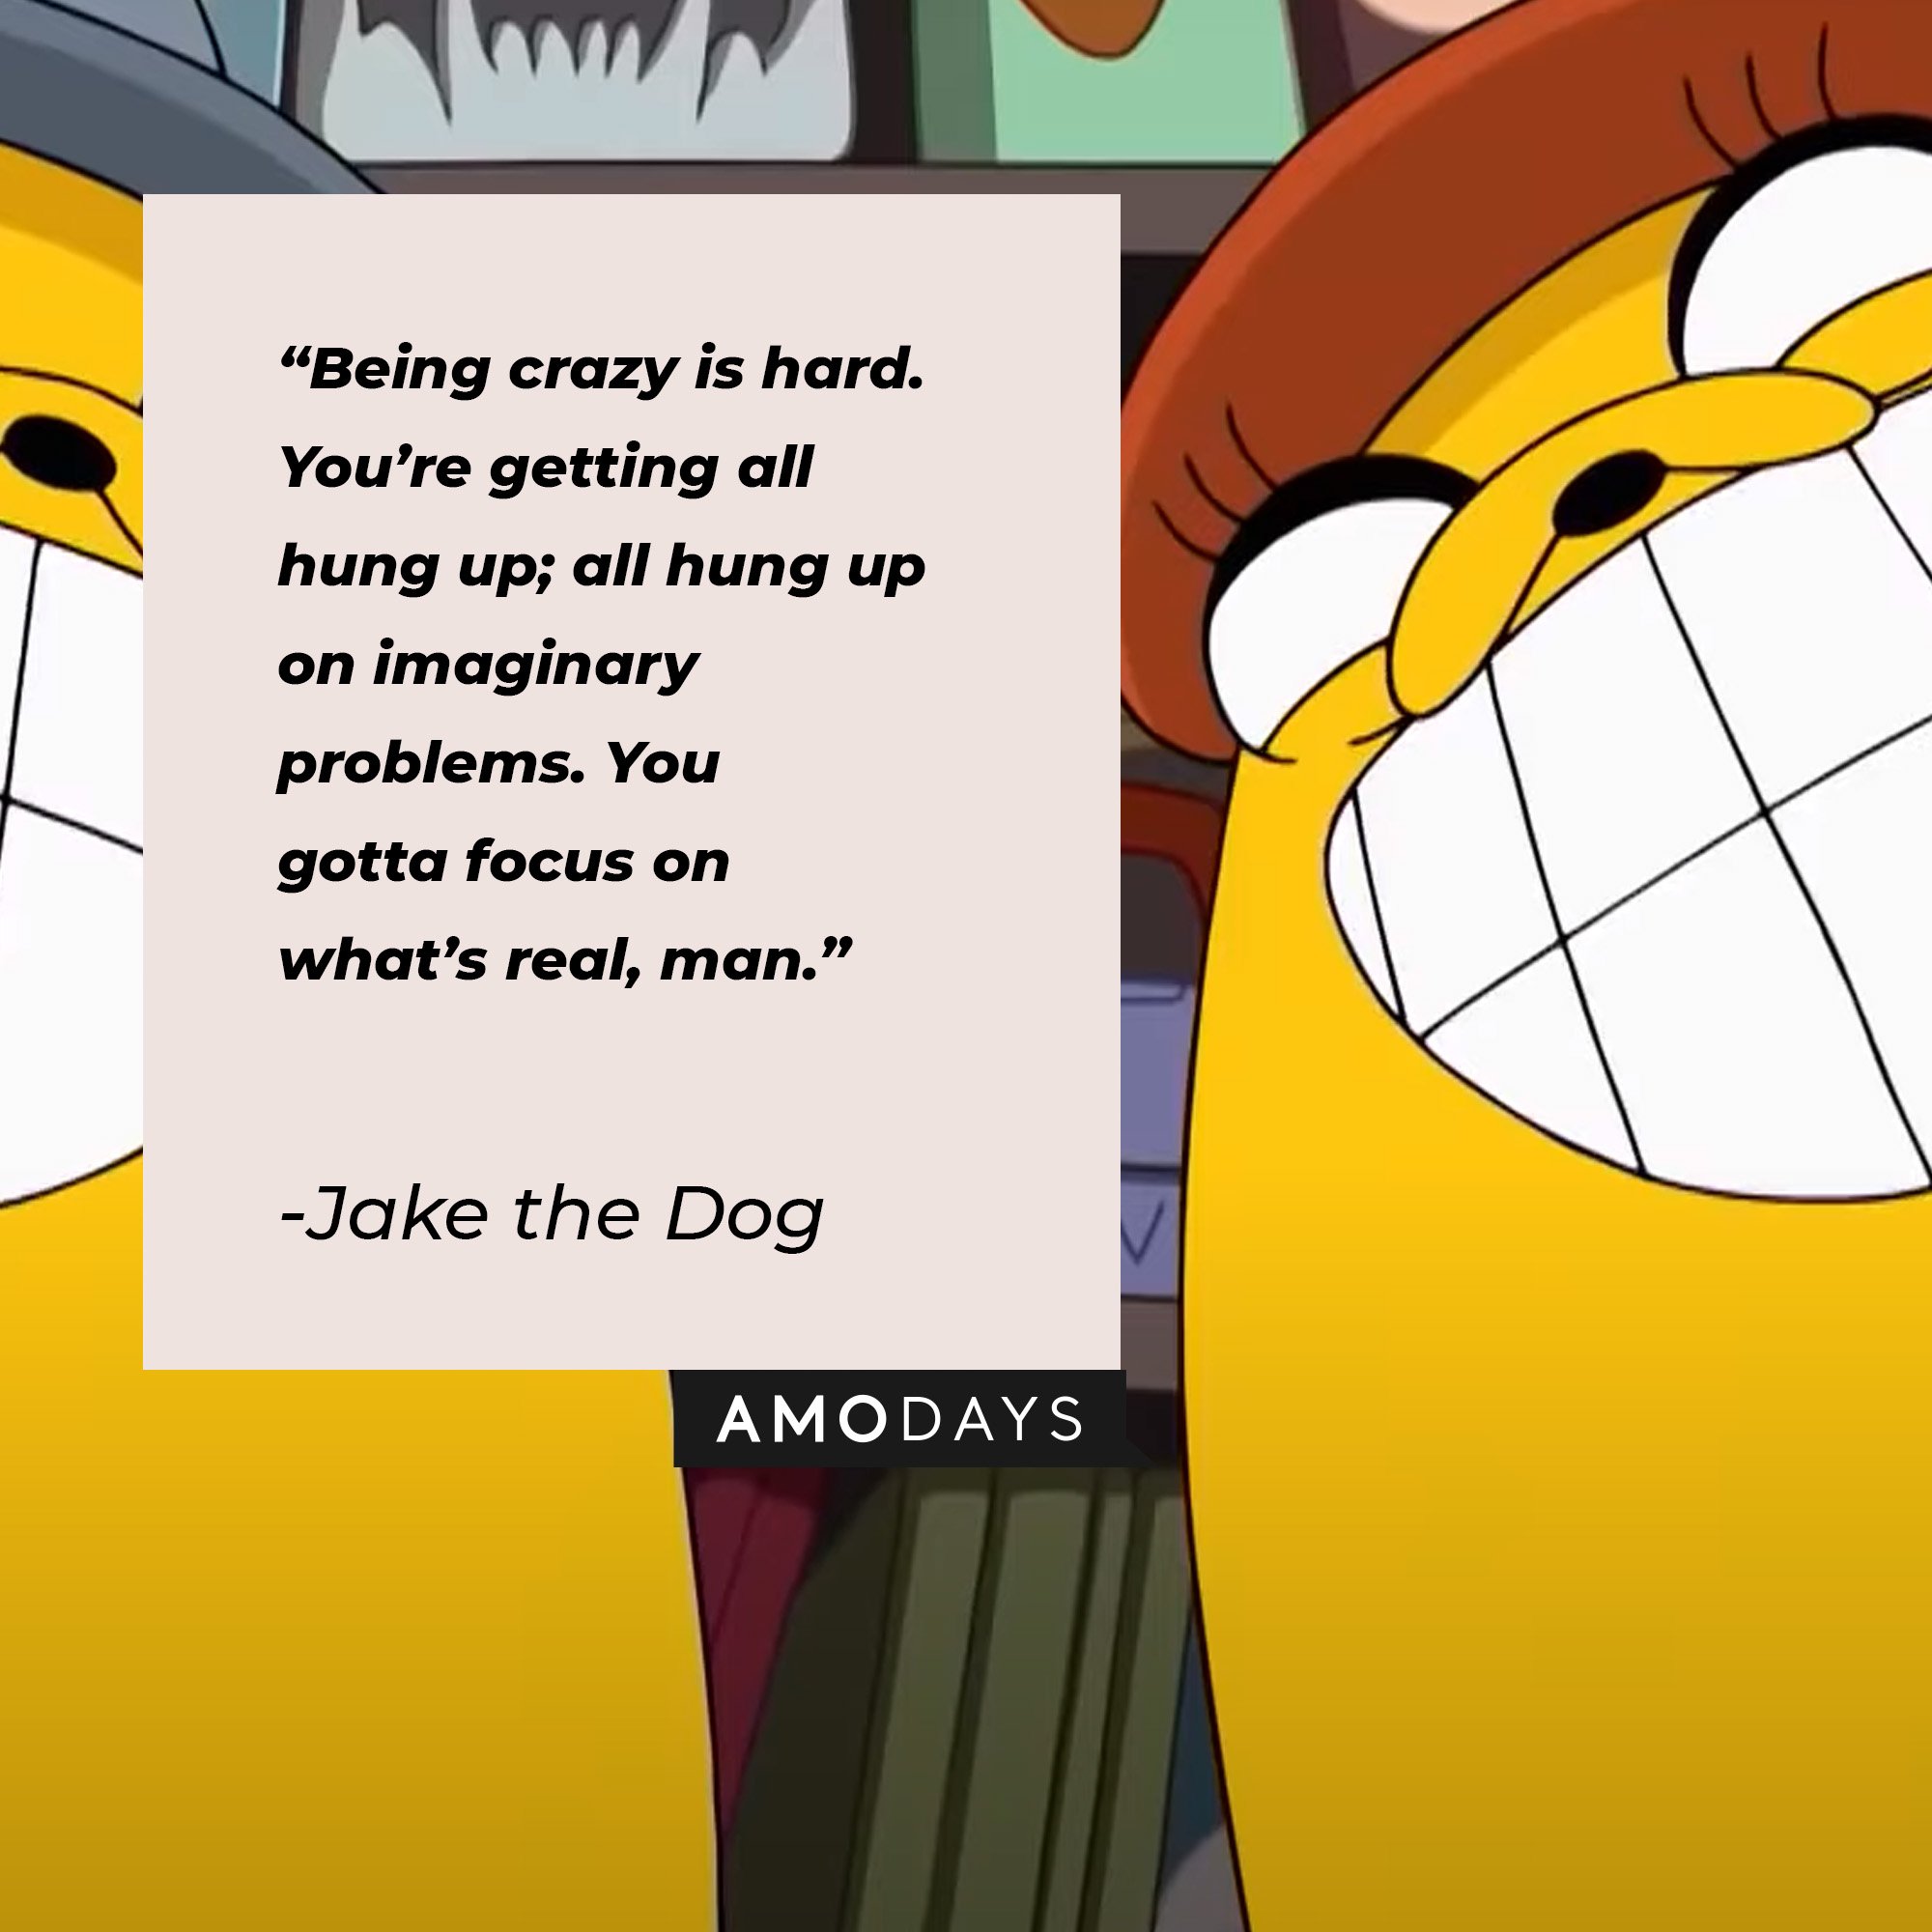  Jake the Dog's quote: "Being crazy is hard. You’re getting all hung up; all hung up on imaginary problems. You gotta focus on what’s real, man." | Image: AmoDays